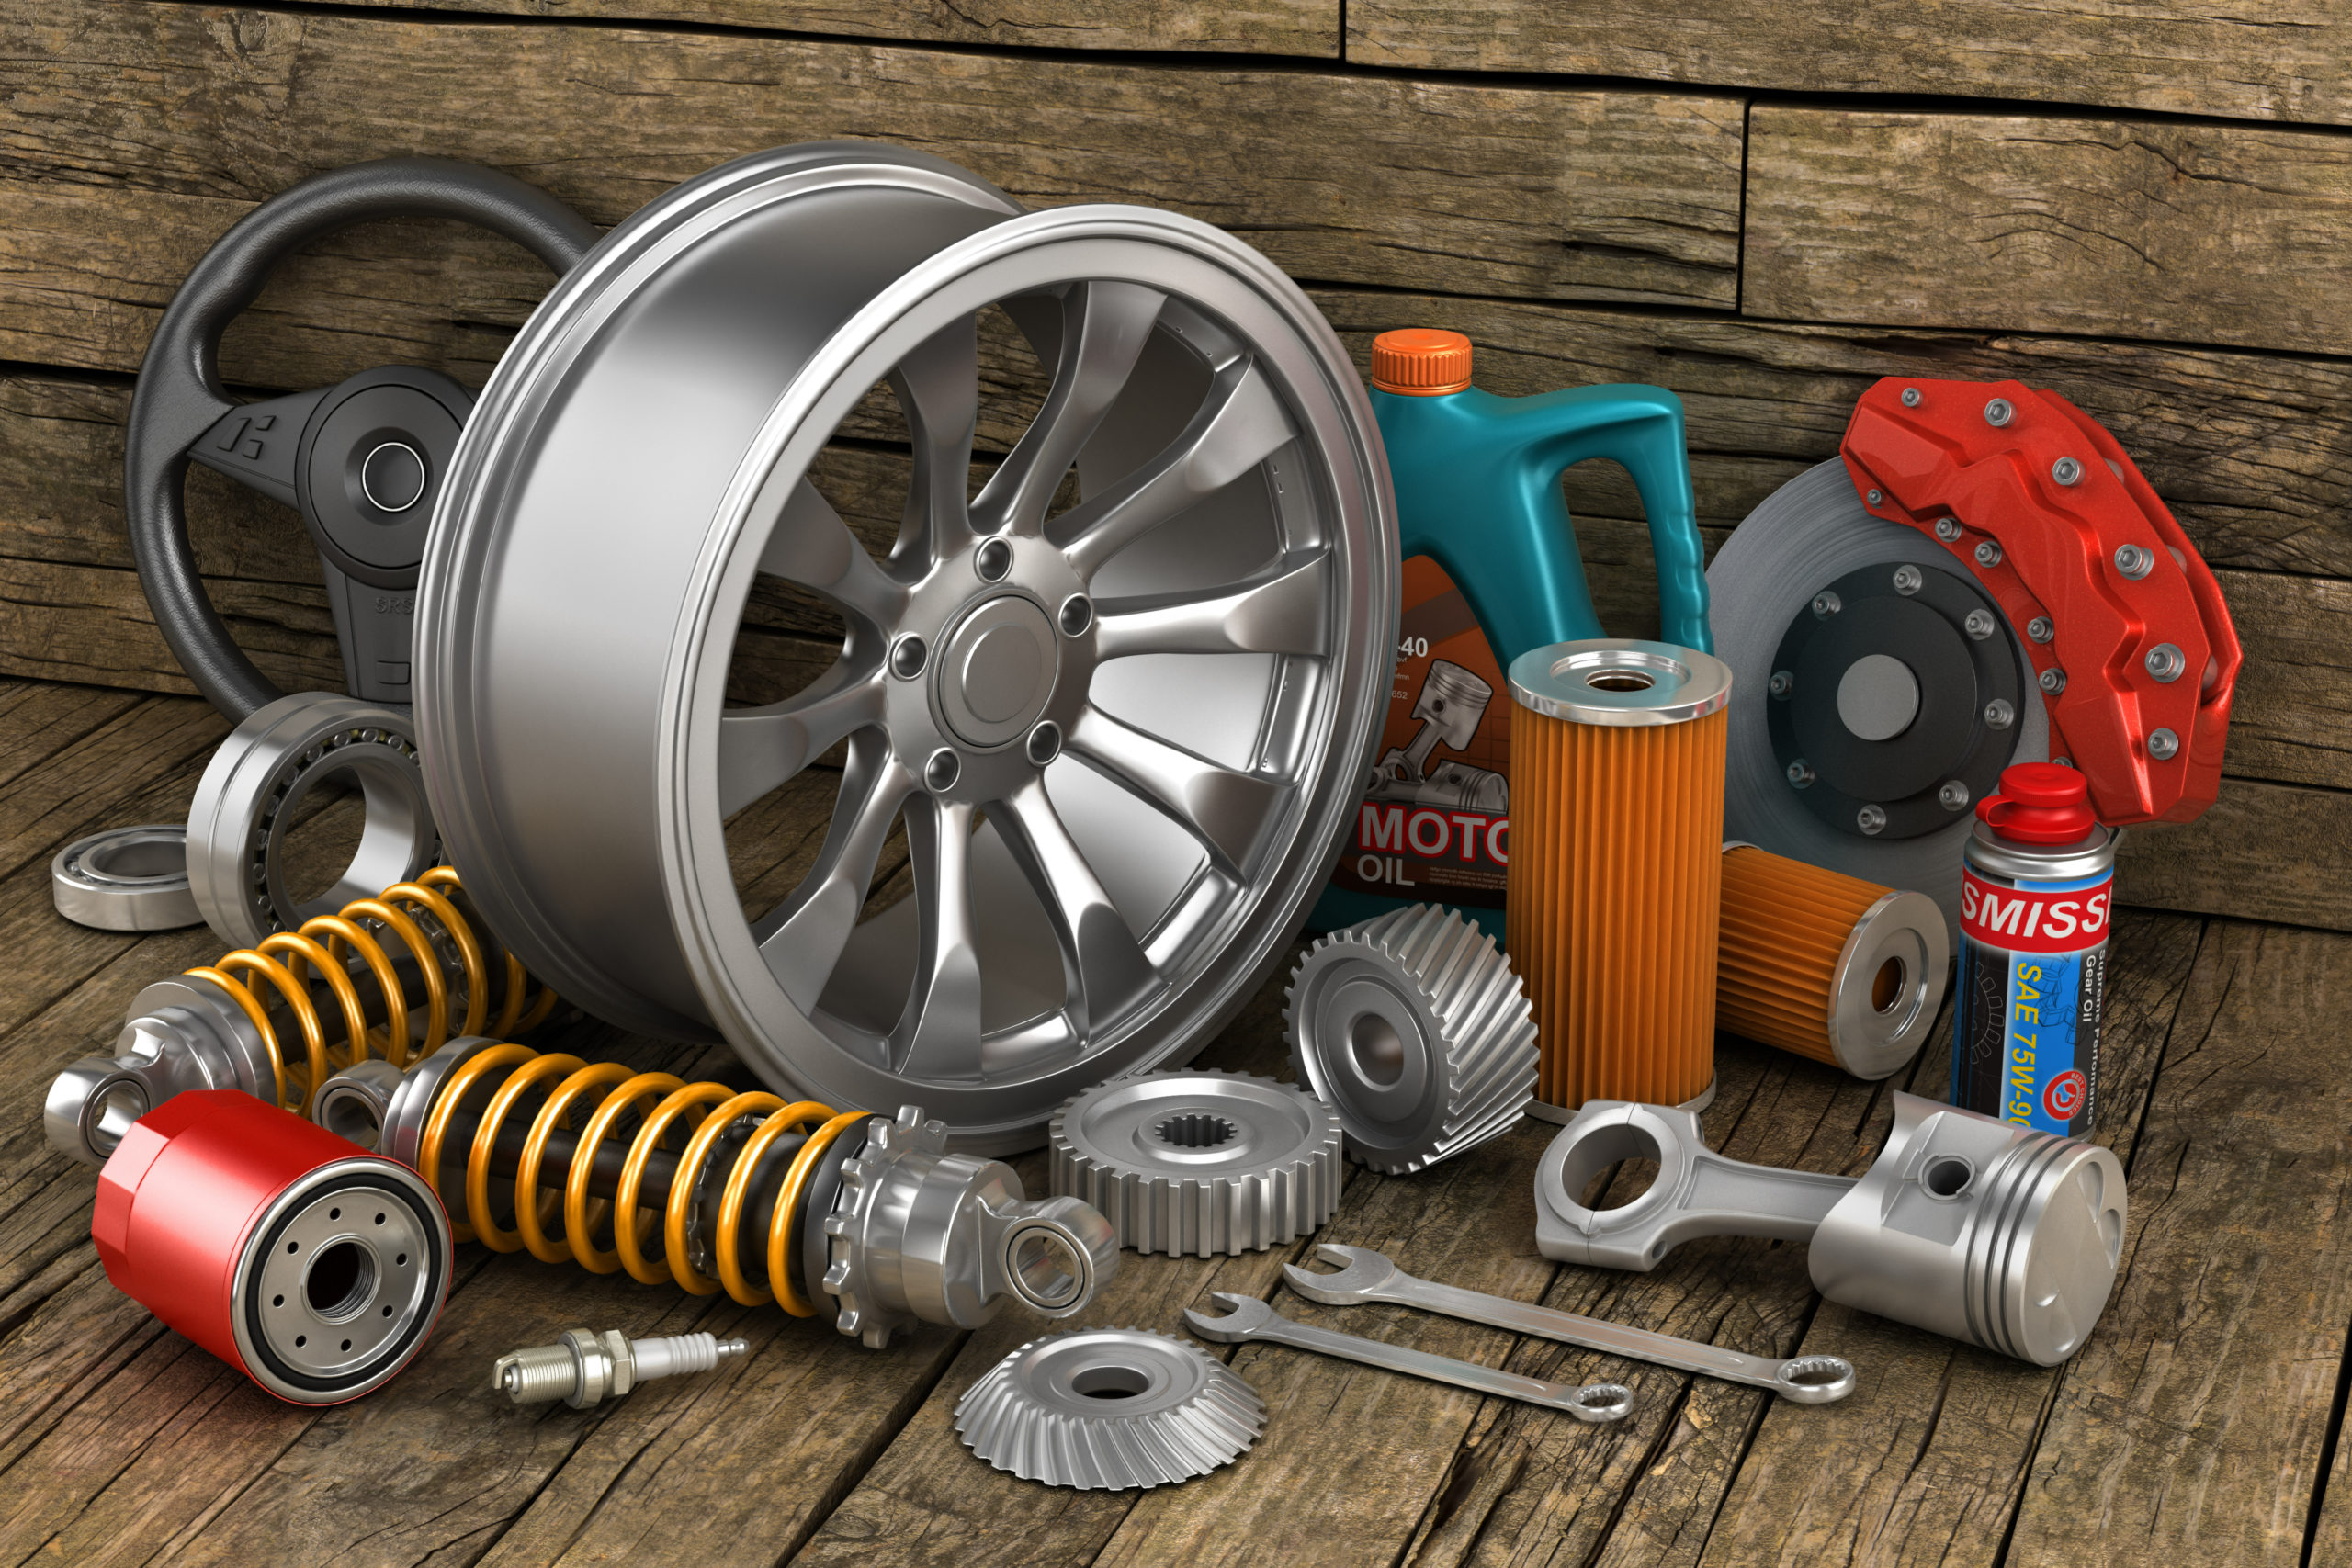 Poor content can stall ecommerce for automotive aftermarket sellers - Digital Commerce 360